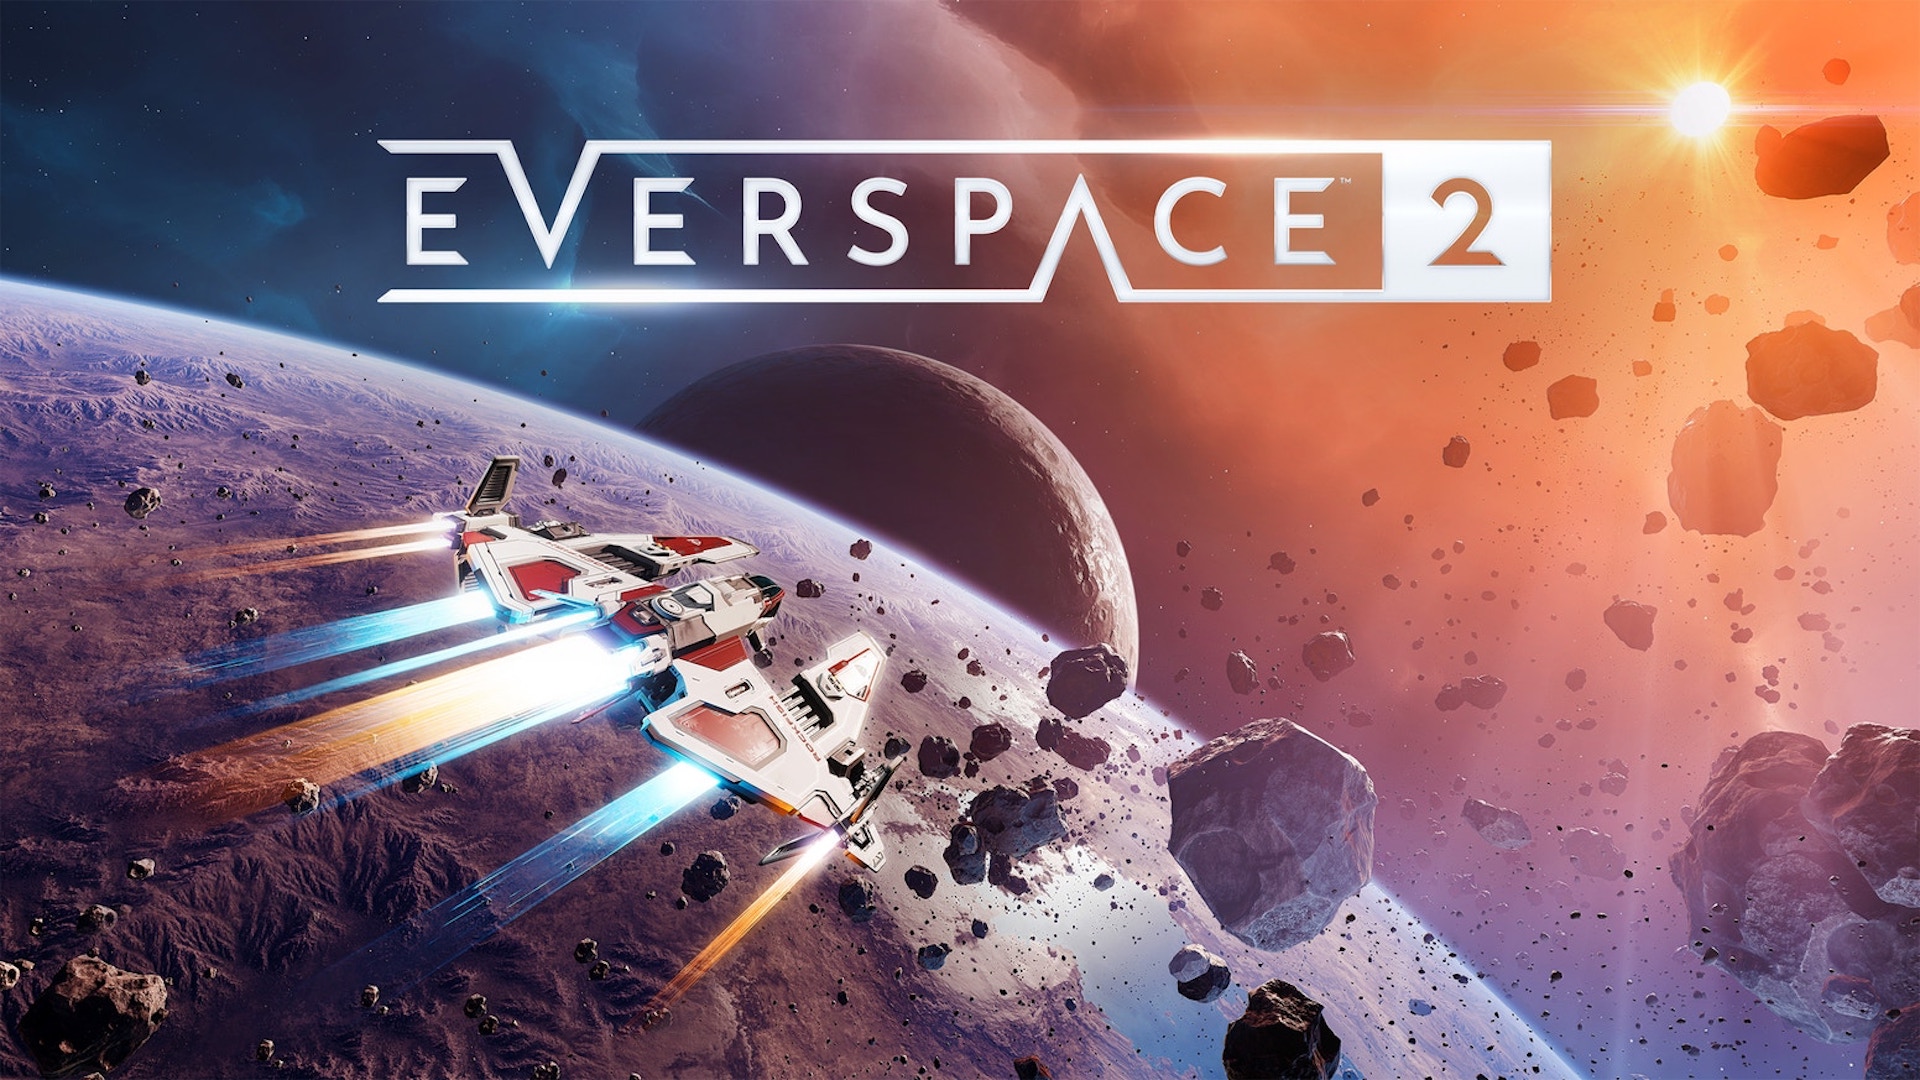 Everspace 2 is Coming to PS5 and Xbox Series X/S on August 15